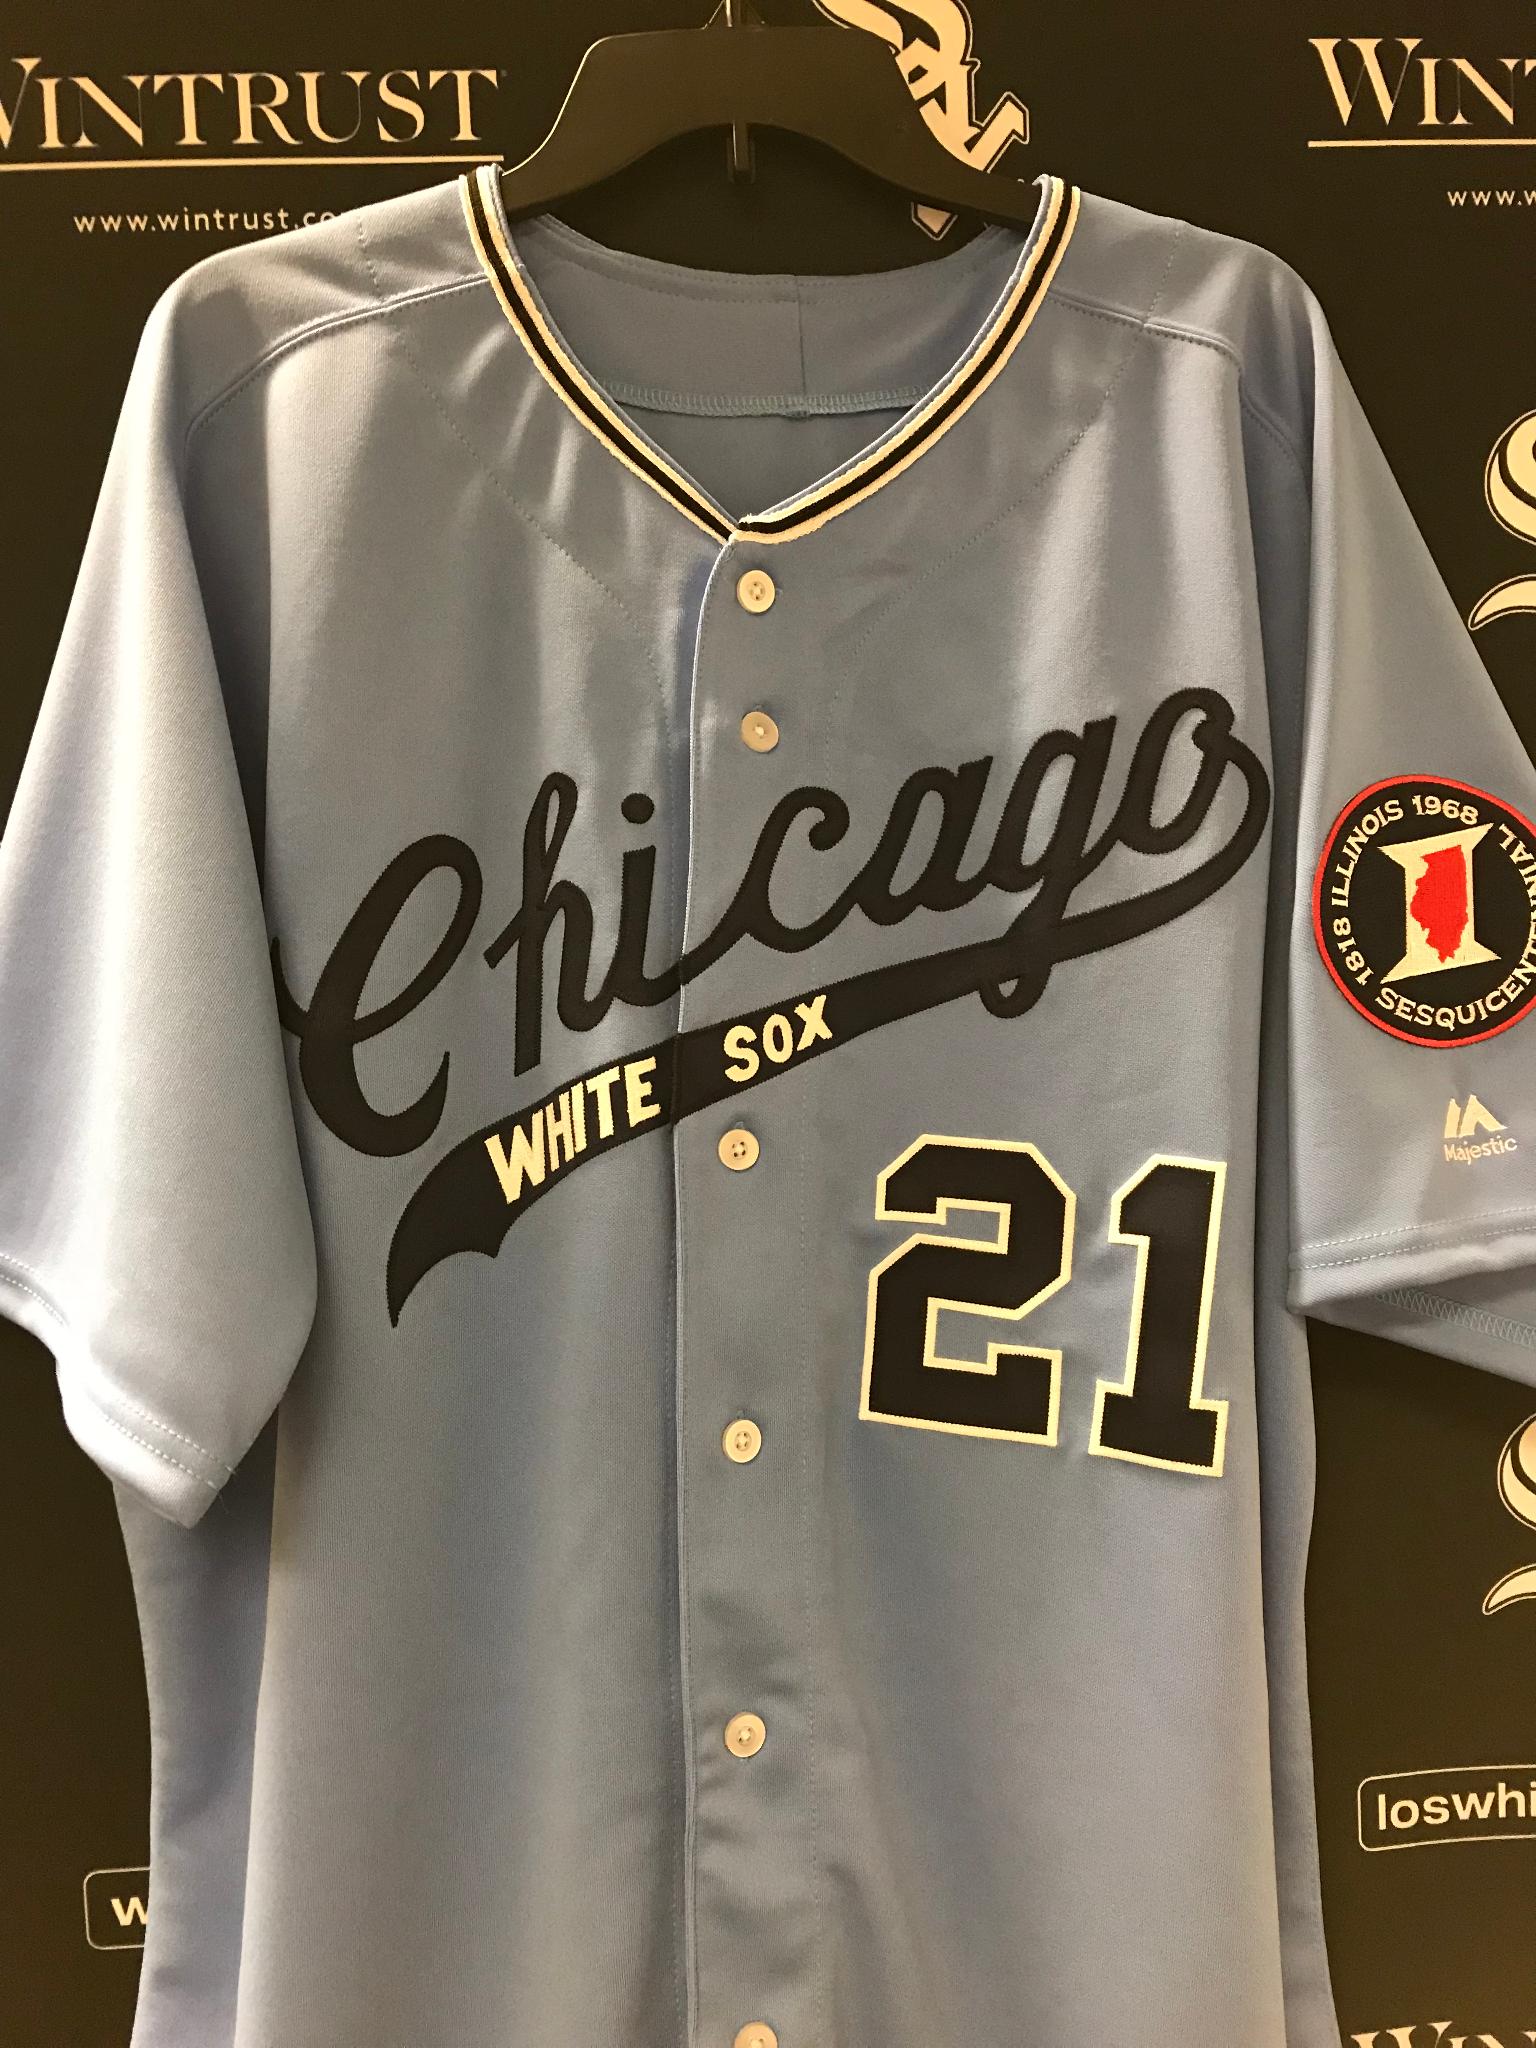 chicago white sox away jersey